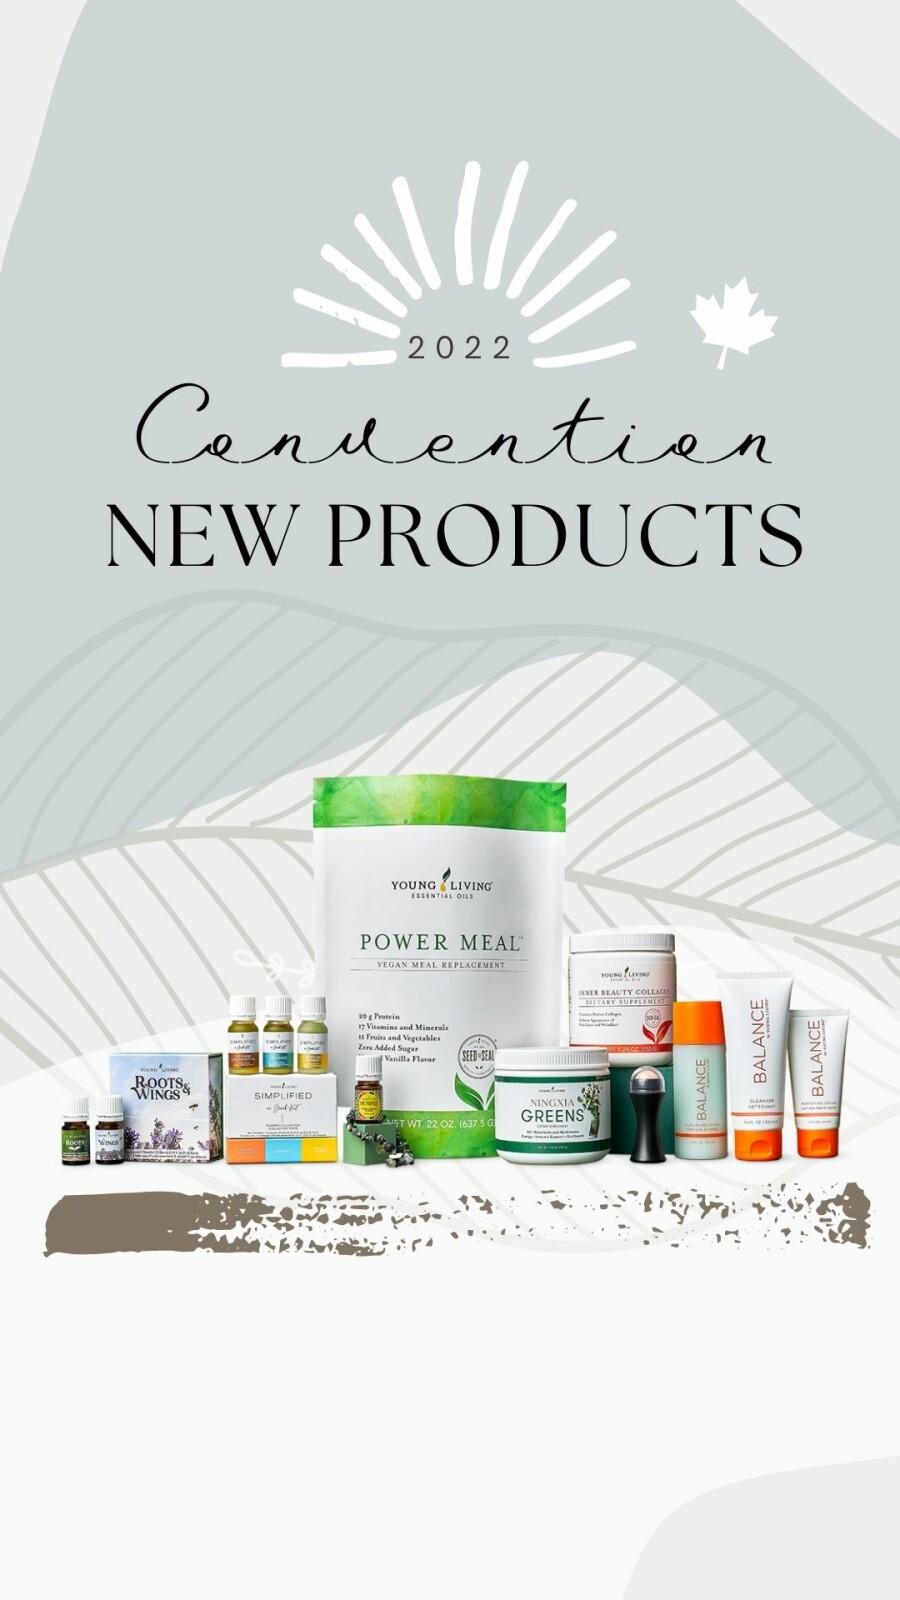 Today Young Living releases new products for a healthier you!